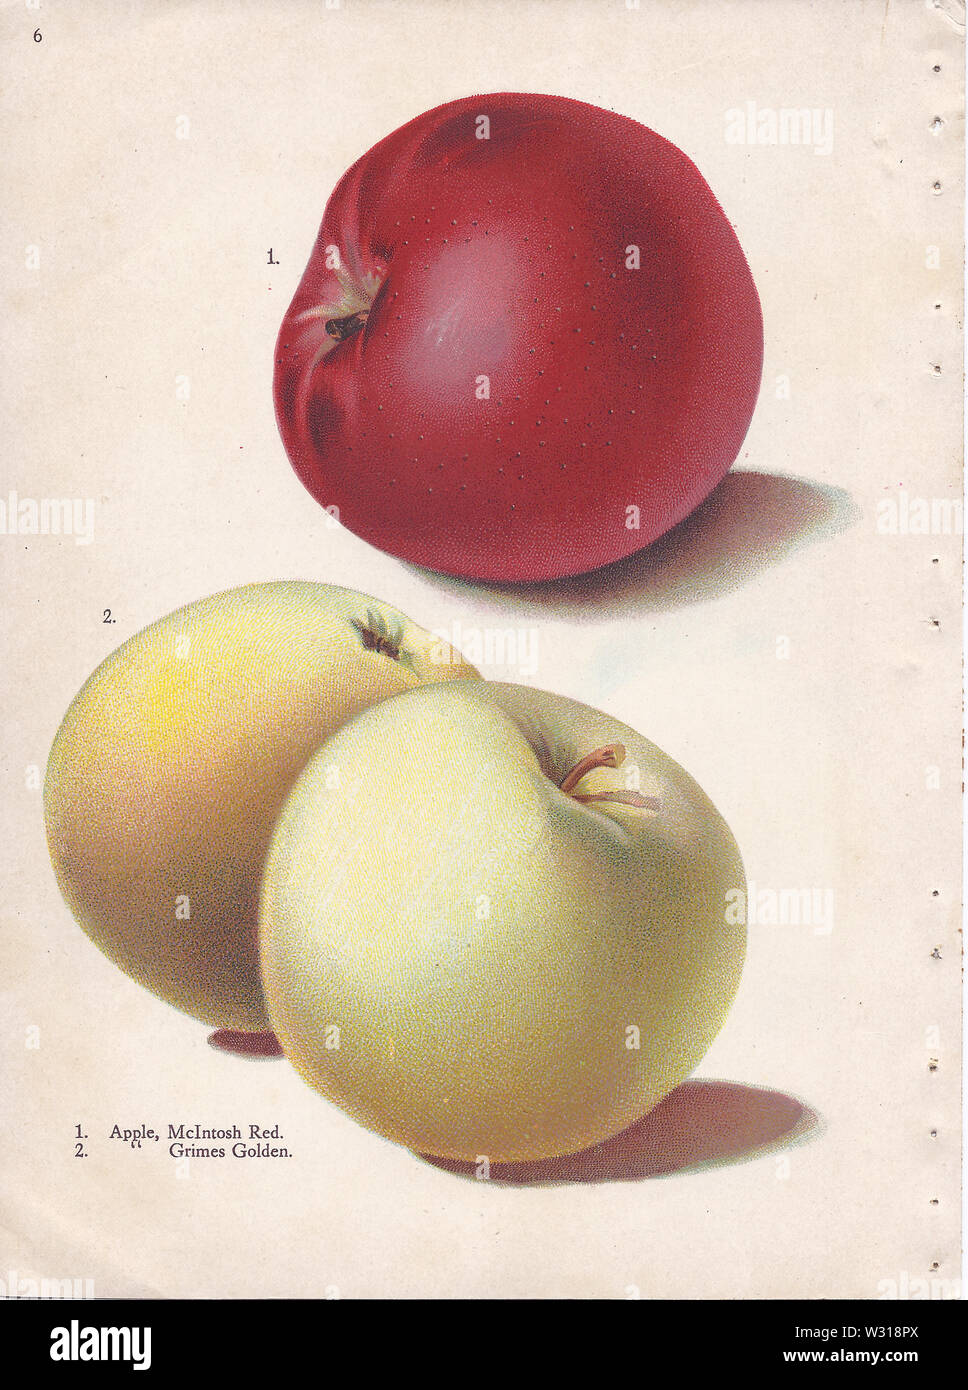 1909 illustrations by Alois Lunzer depicting apple cultivars McIntosh Red and Grimes Golden Stock Photo